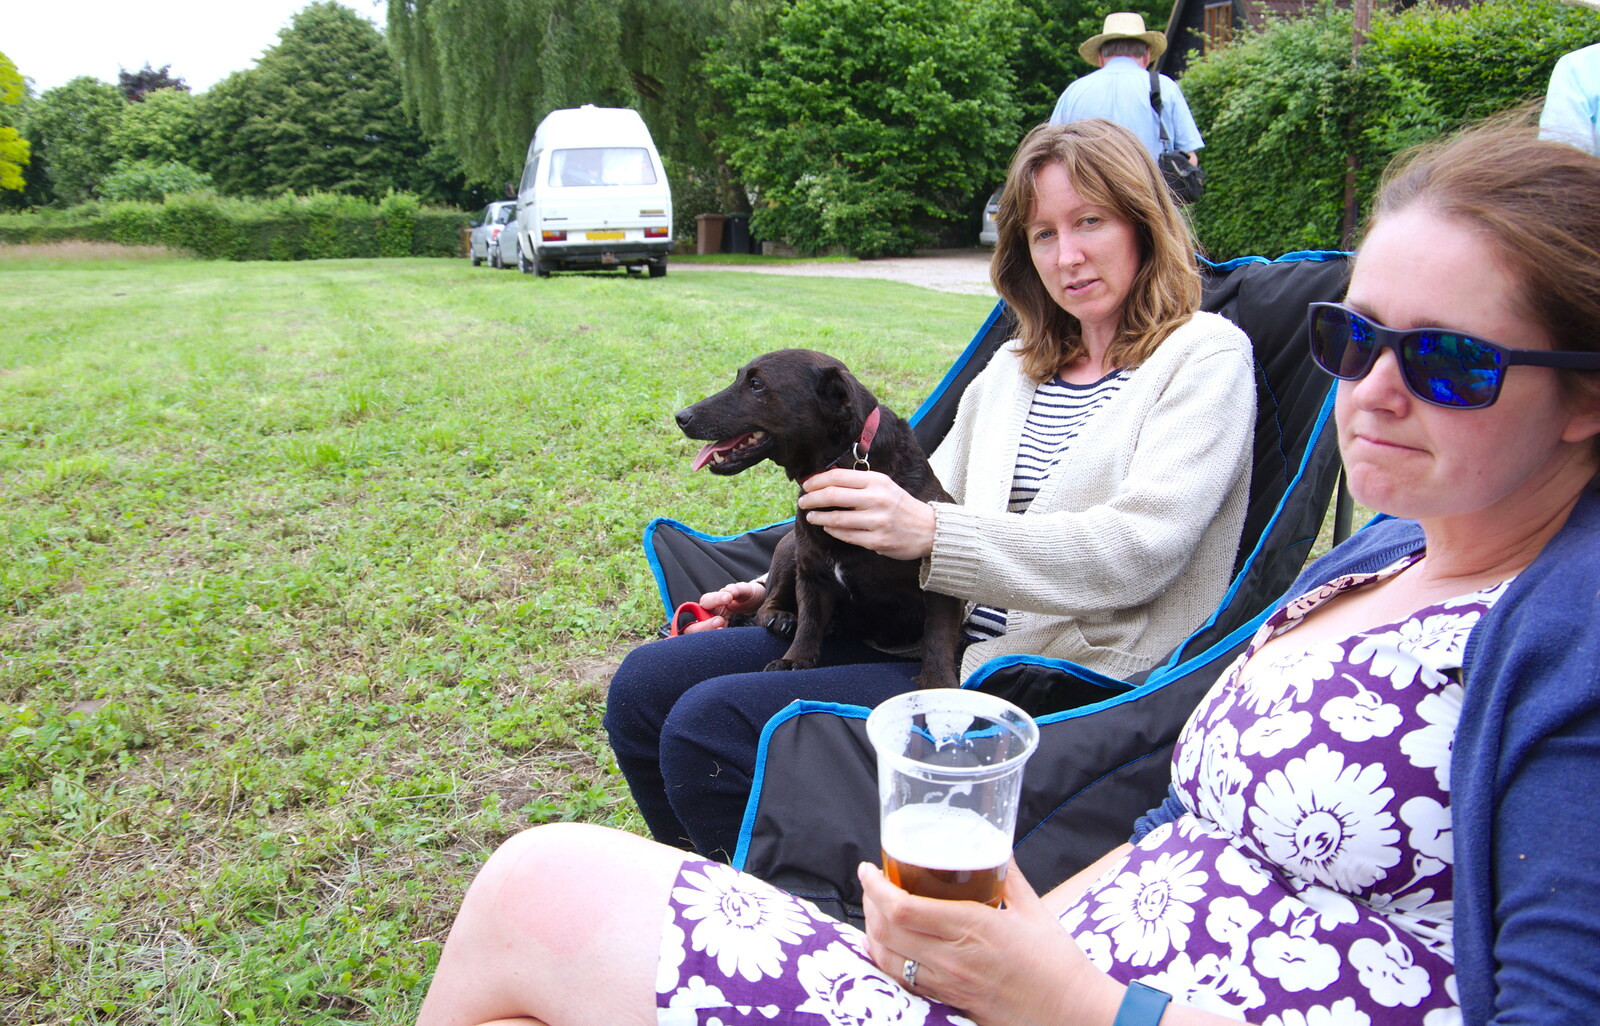 Martina and Isobel chat from A Hog Roast on Little Green, Thrandeston, Suffolk - 23rd June 2019